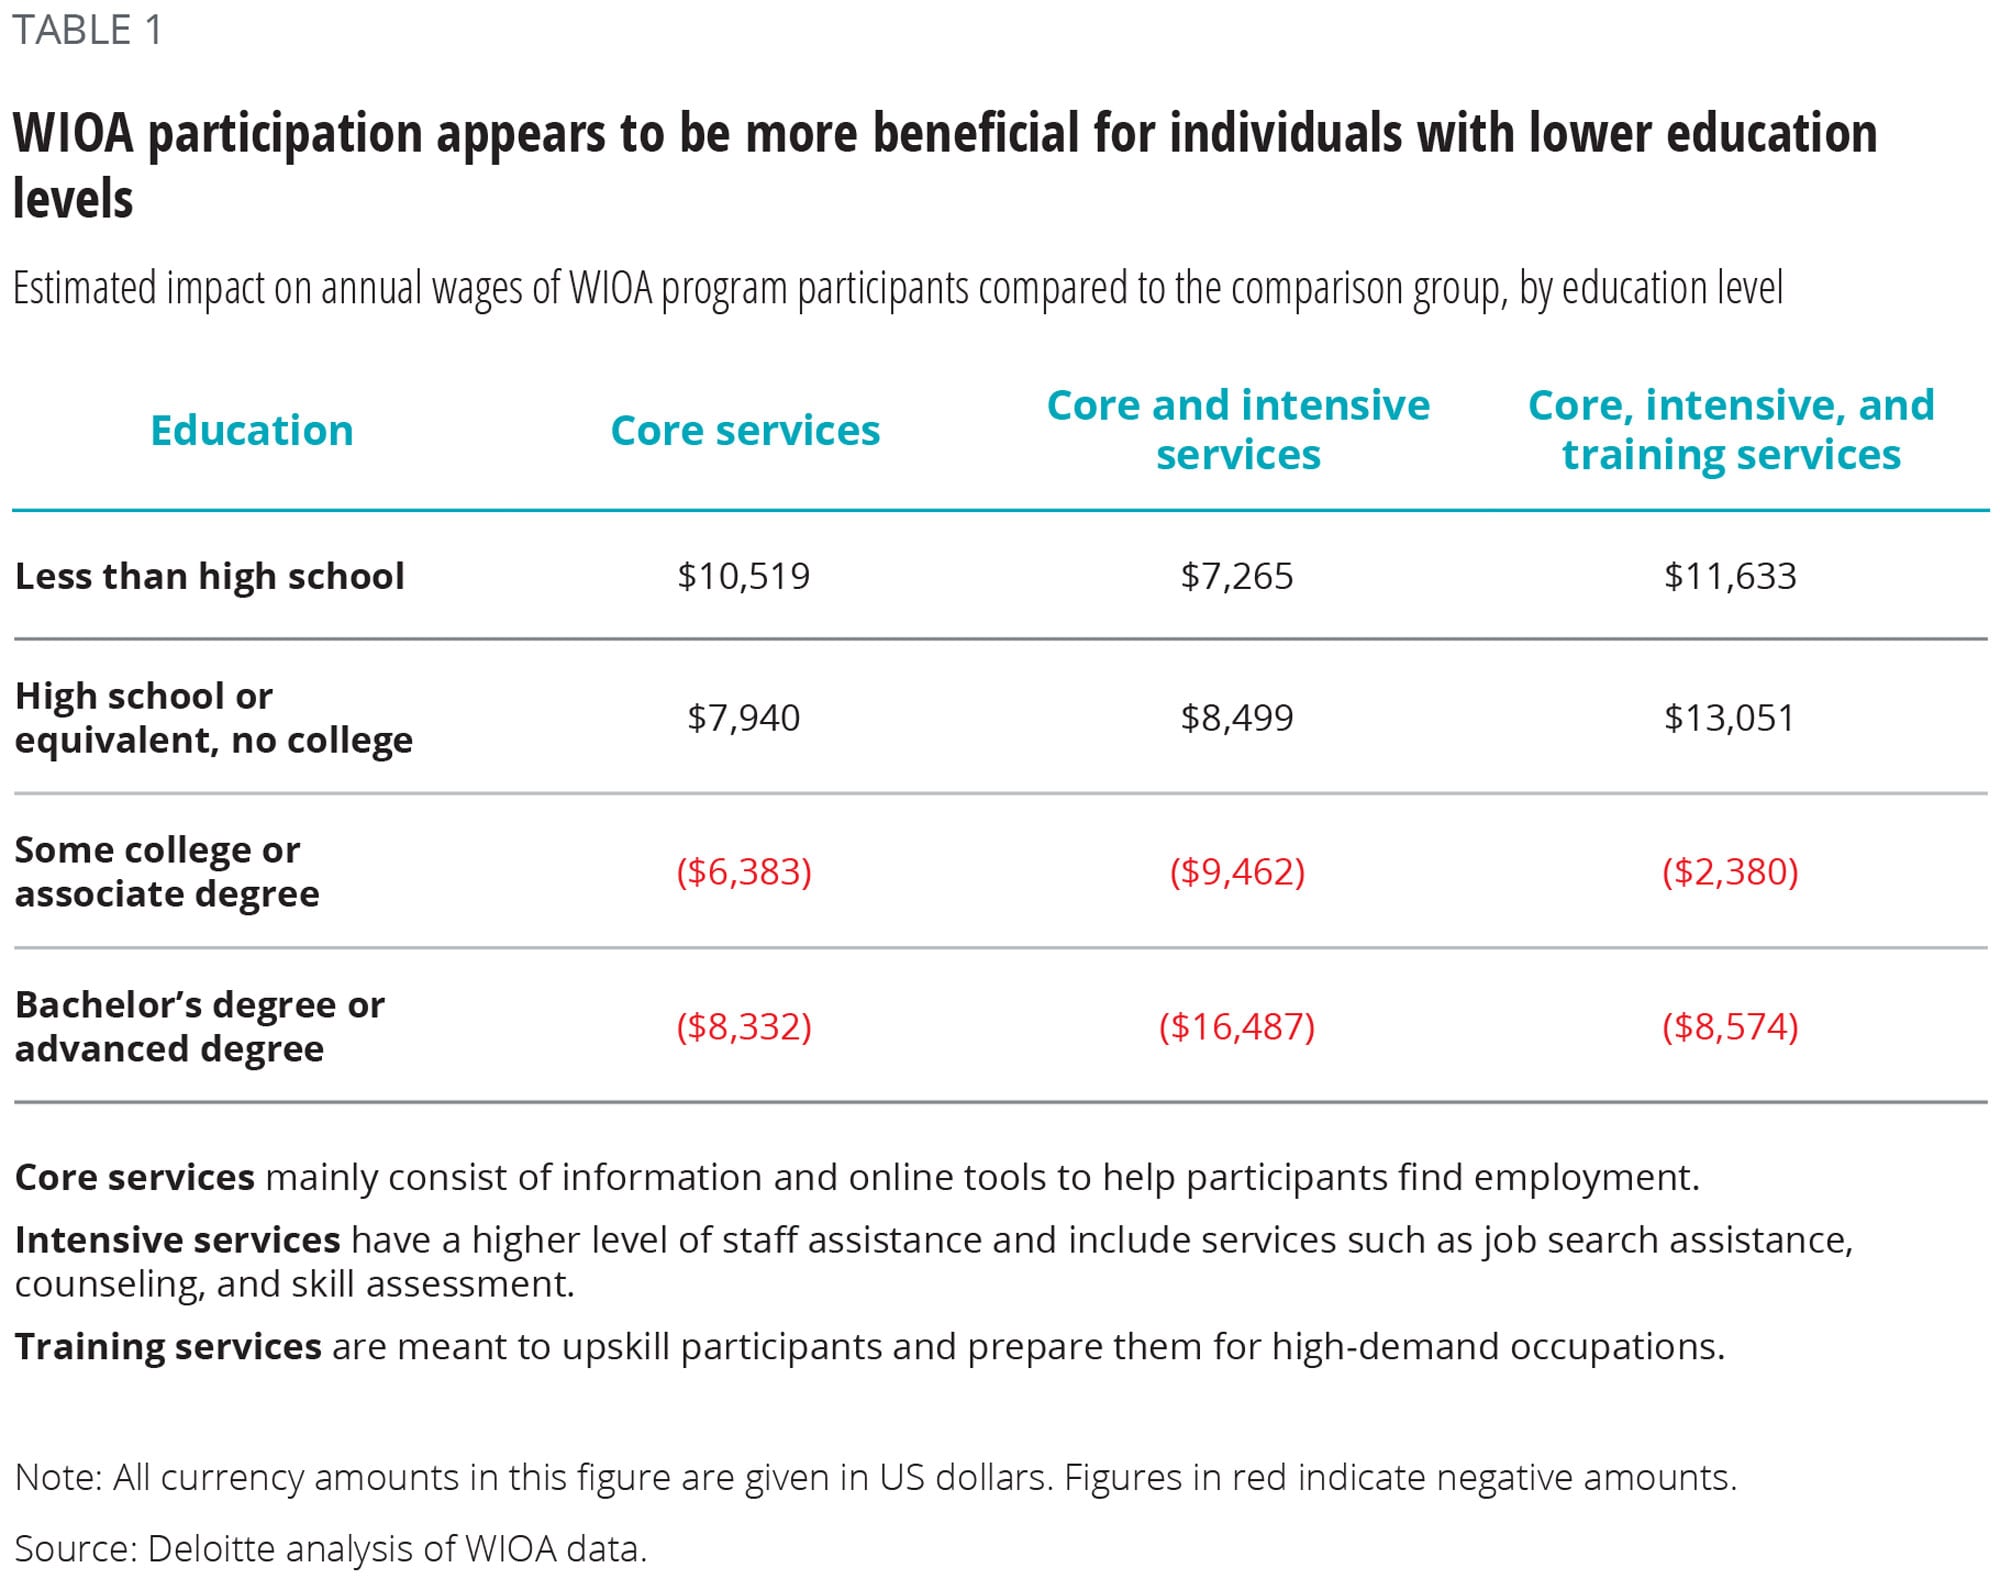 WIOA participation appears to be more beneficial for individuals with lower education levels